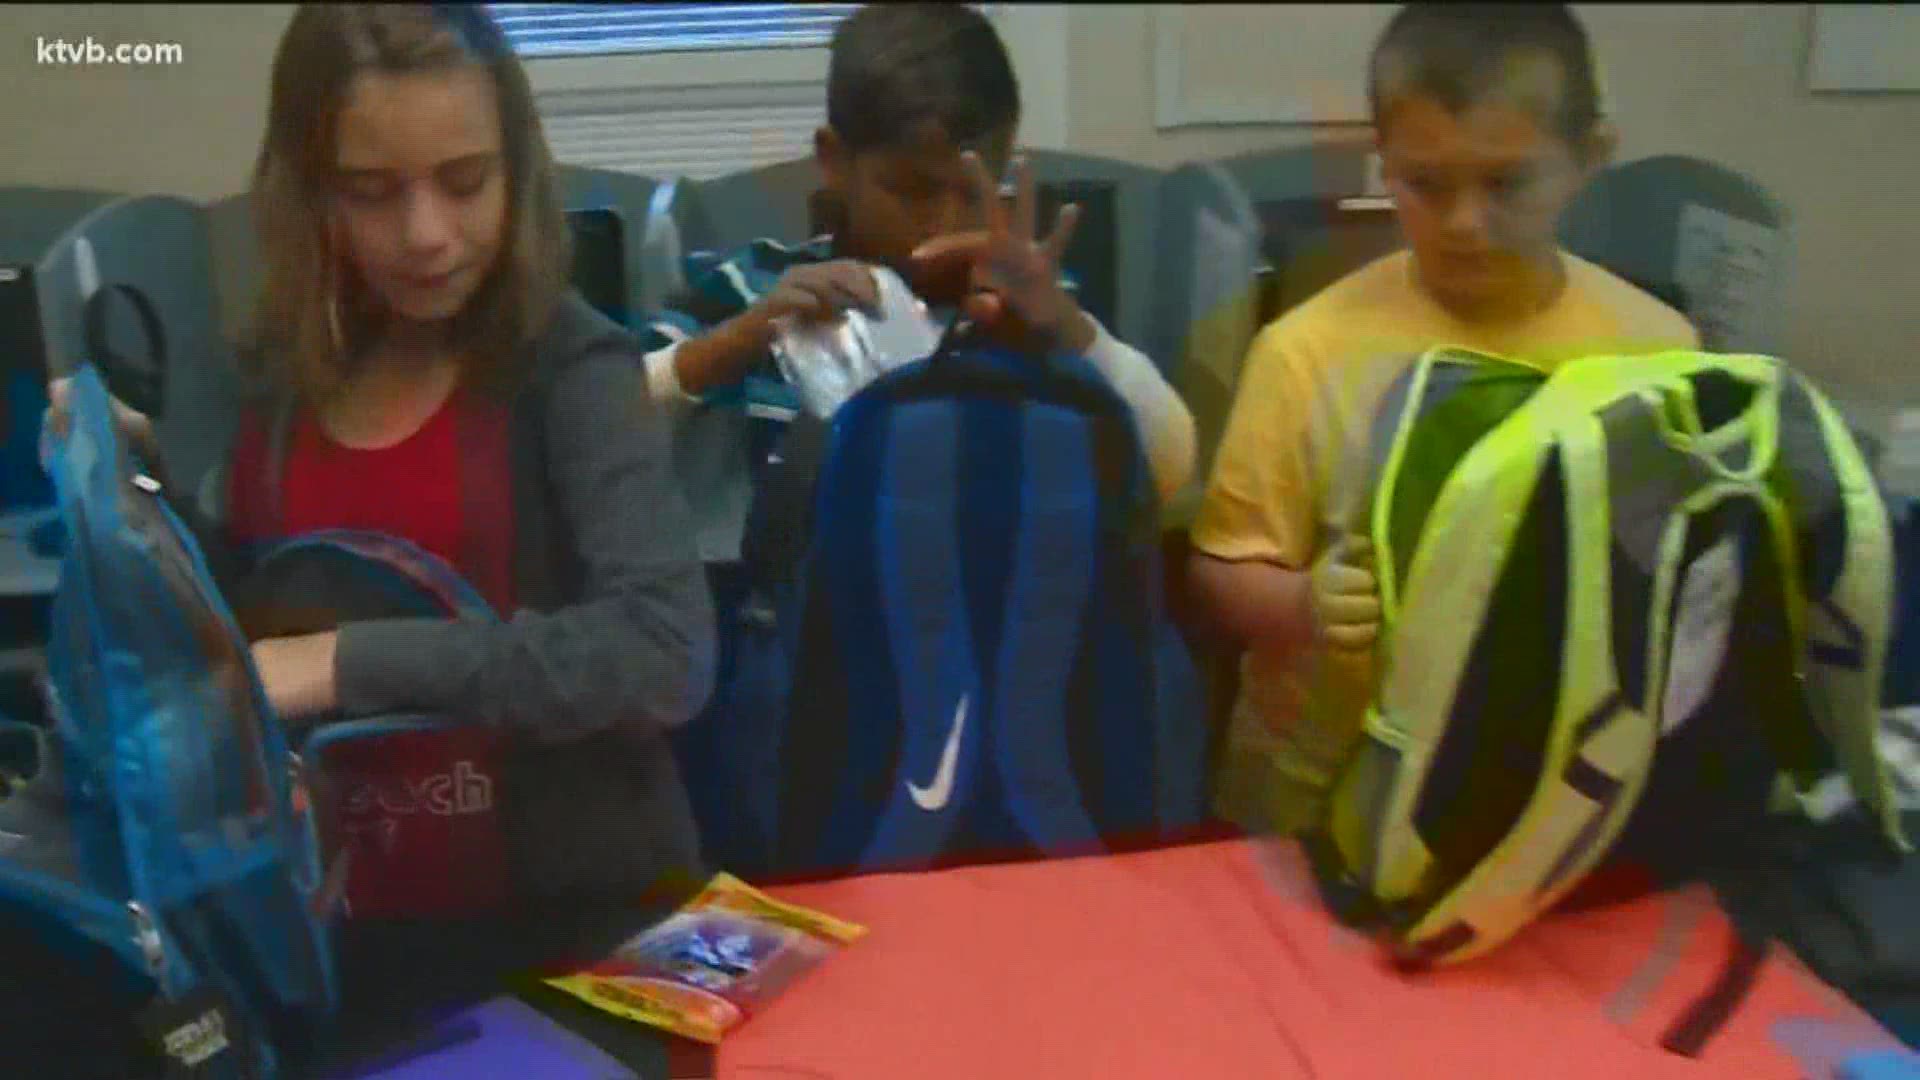 Children served by the Rescue Mission need school supplies.